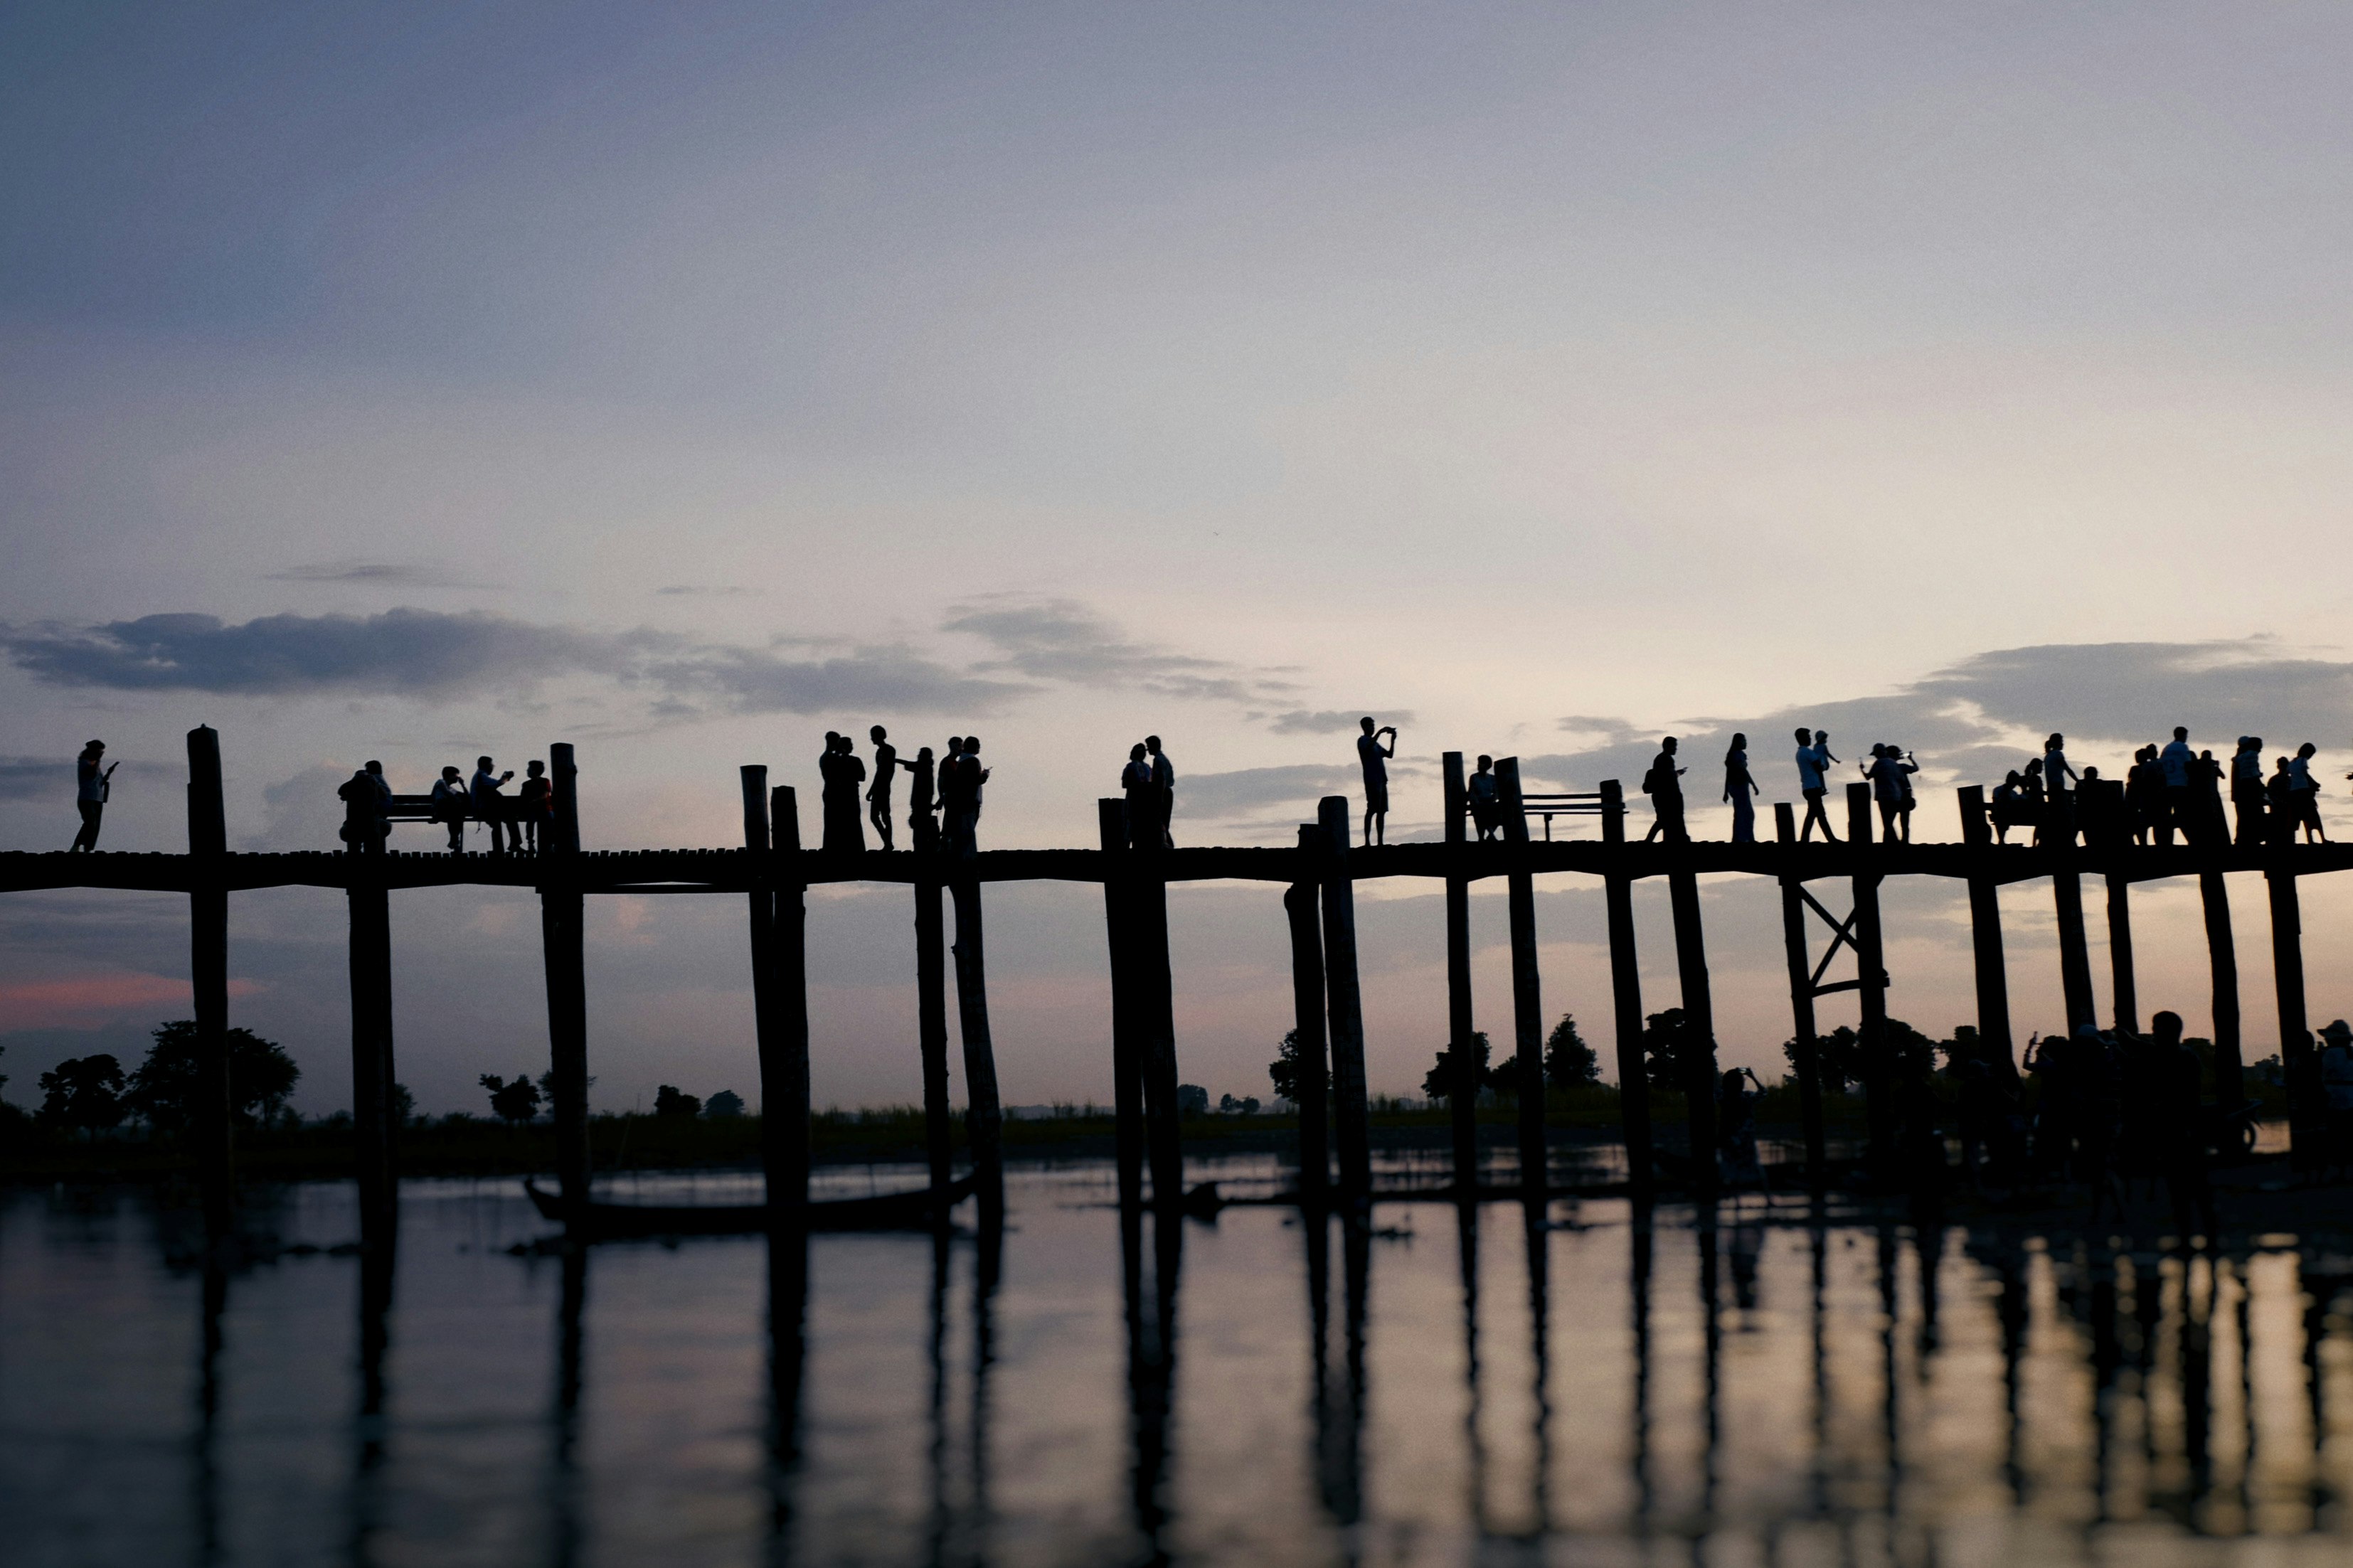 silhouette of people standing on dock during daytime